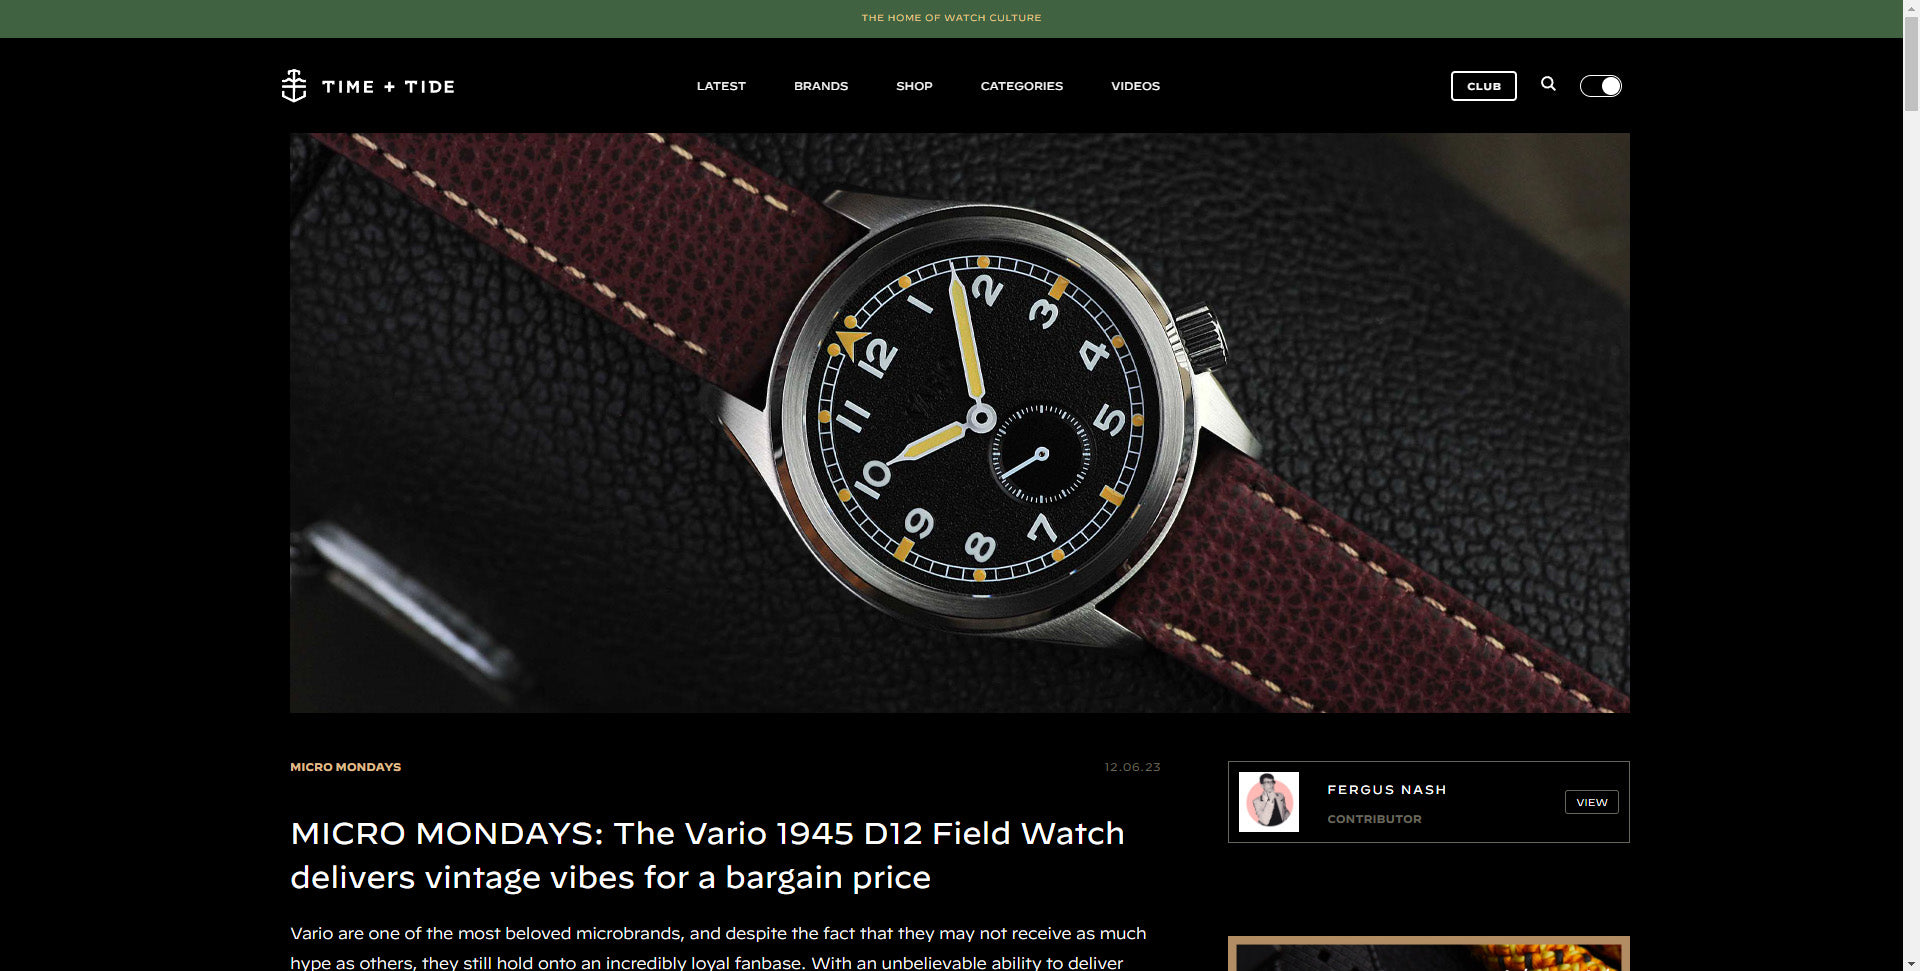 Vario 1945 D12 Field Watch featured on Time and Tide